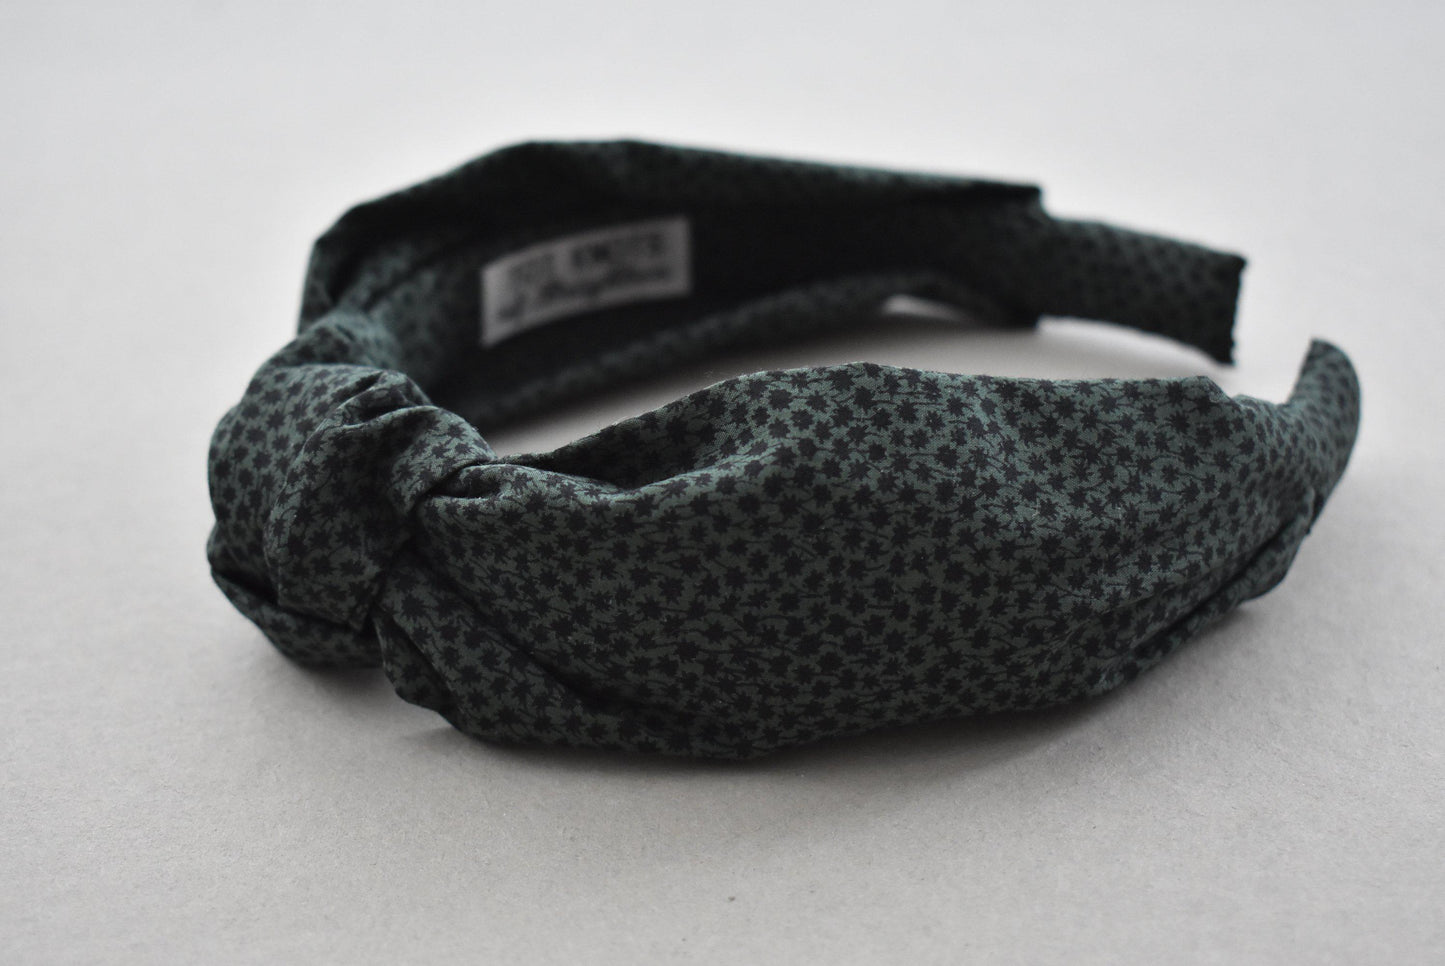 Kids Knot Alice band - Liberty of London Green Marco print